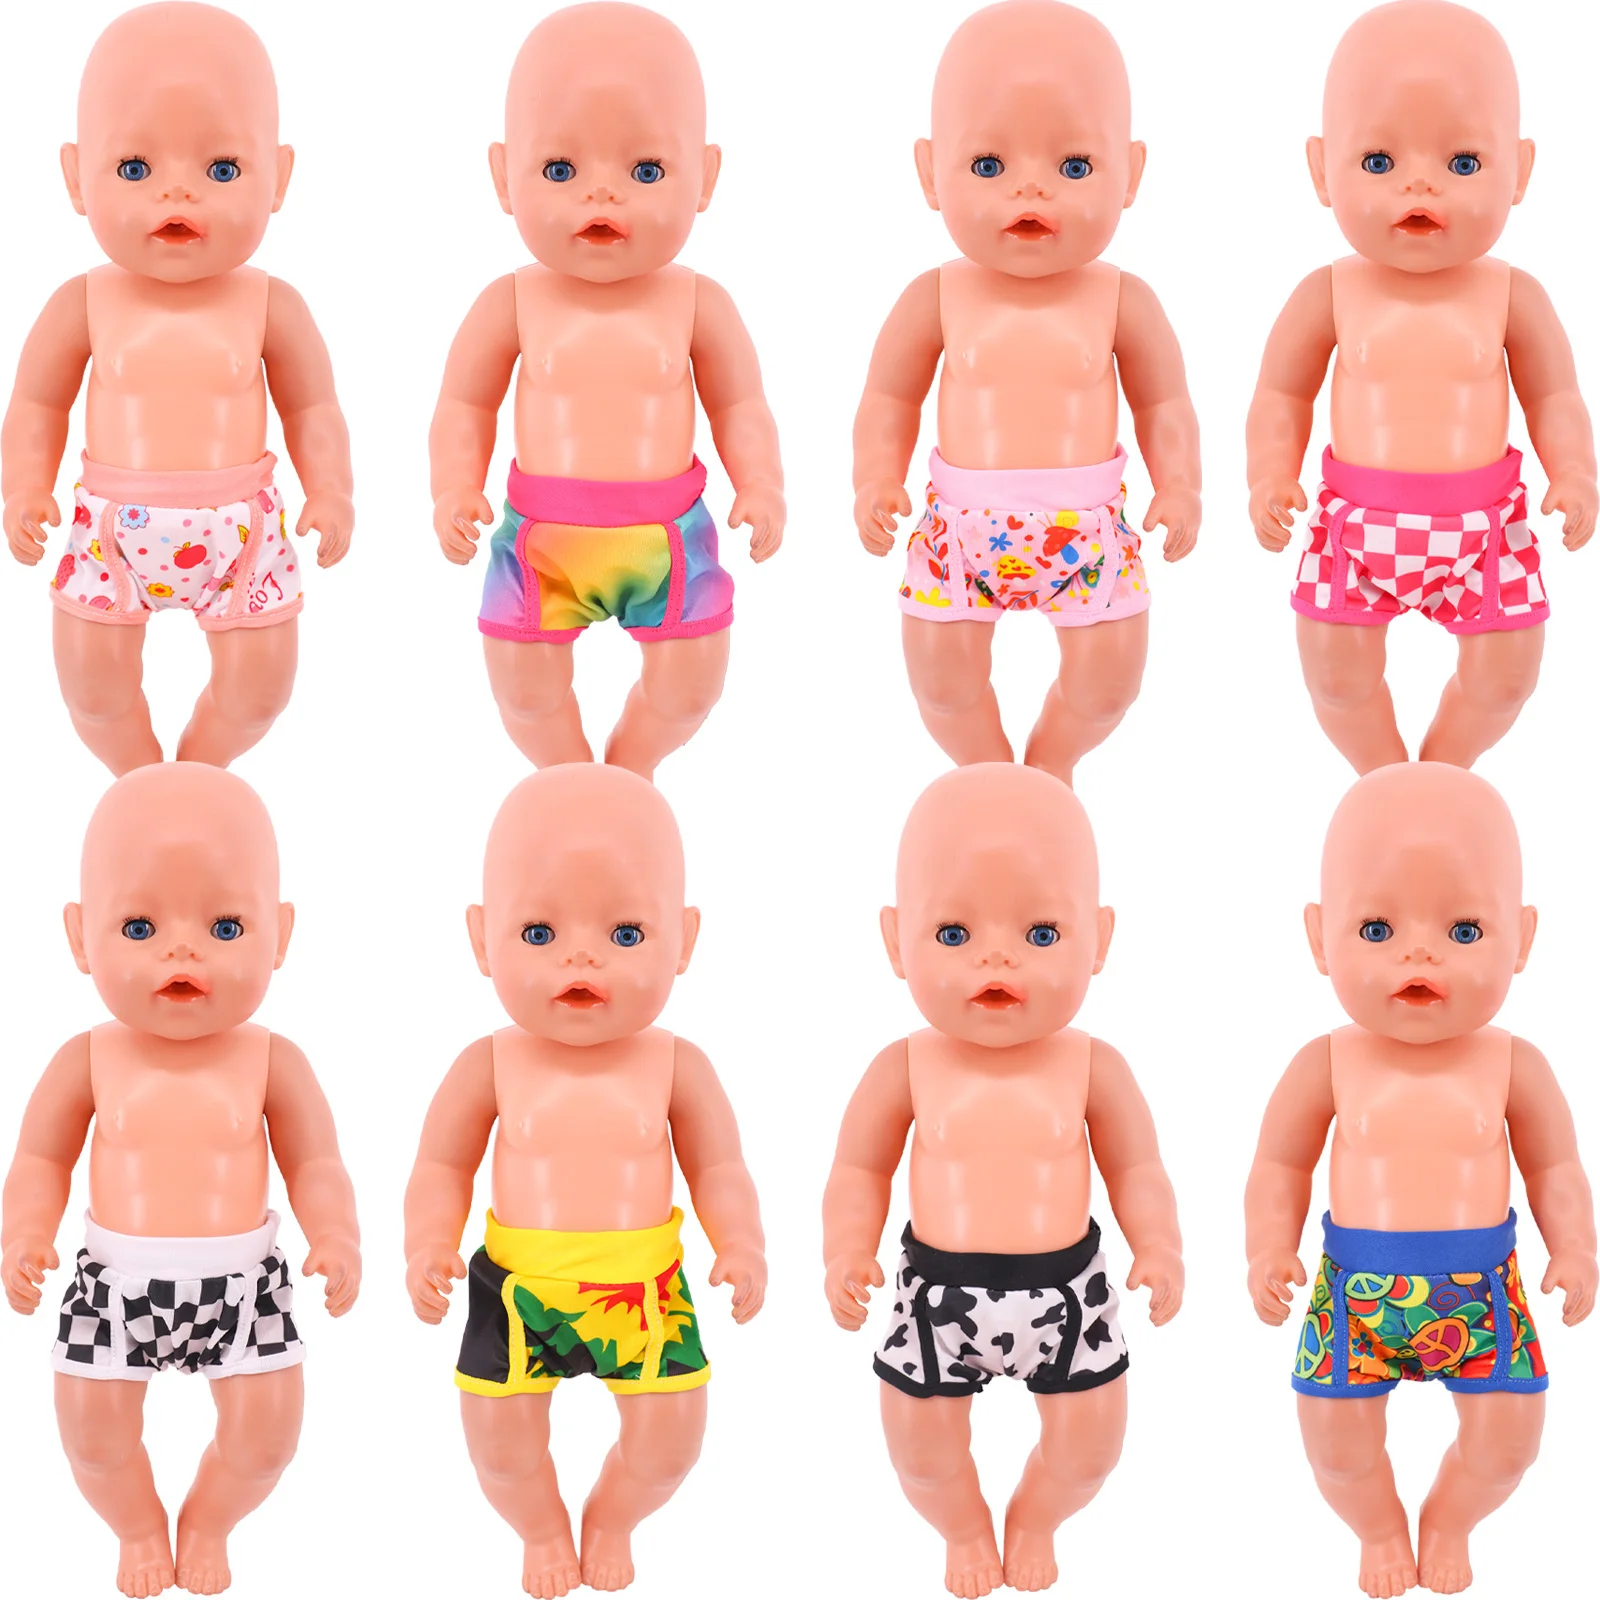 

Doll Clothes Cute Printing Panties For 18Inch Girl American Doll &43Cm Reborn Baby Doll Accessories Our Generation Girls Toys